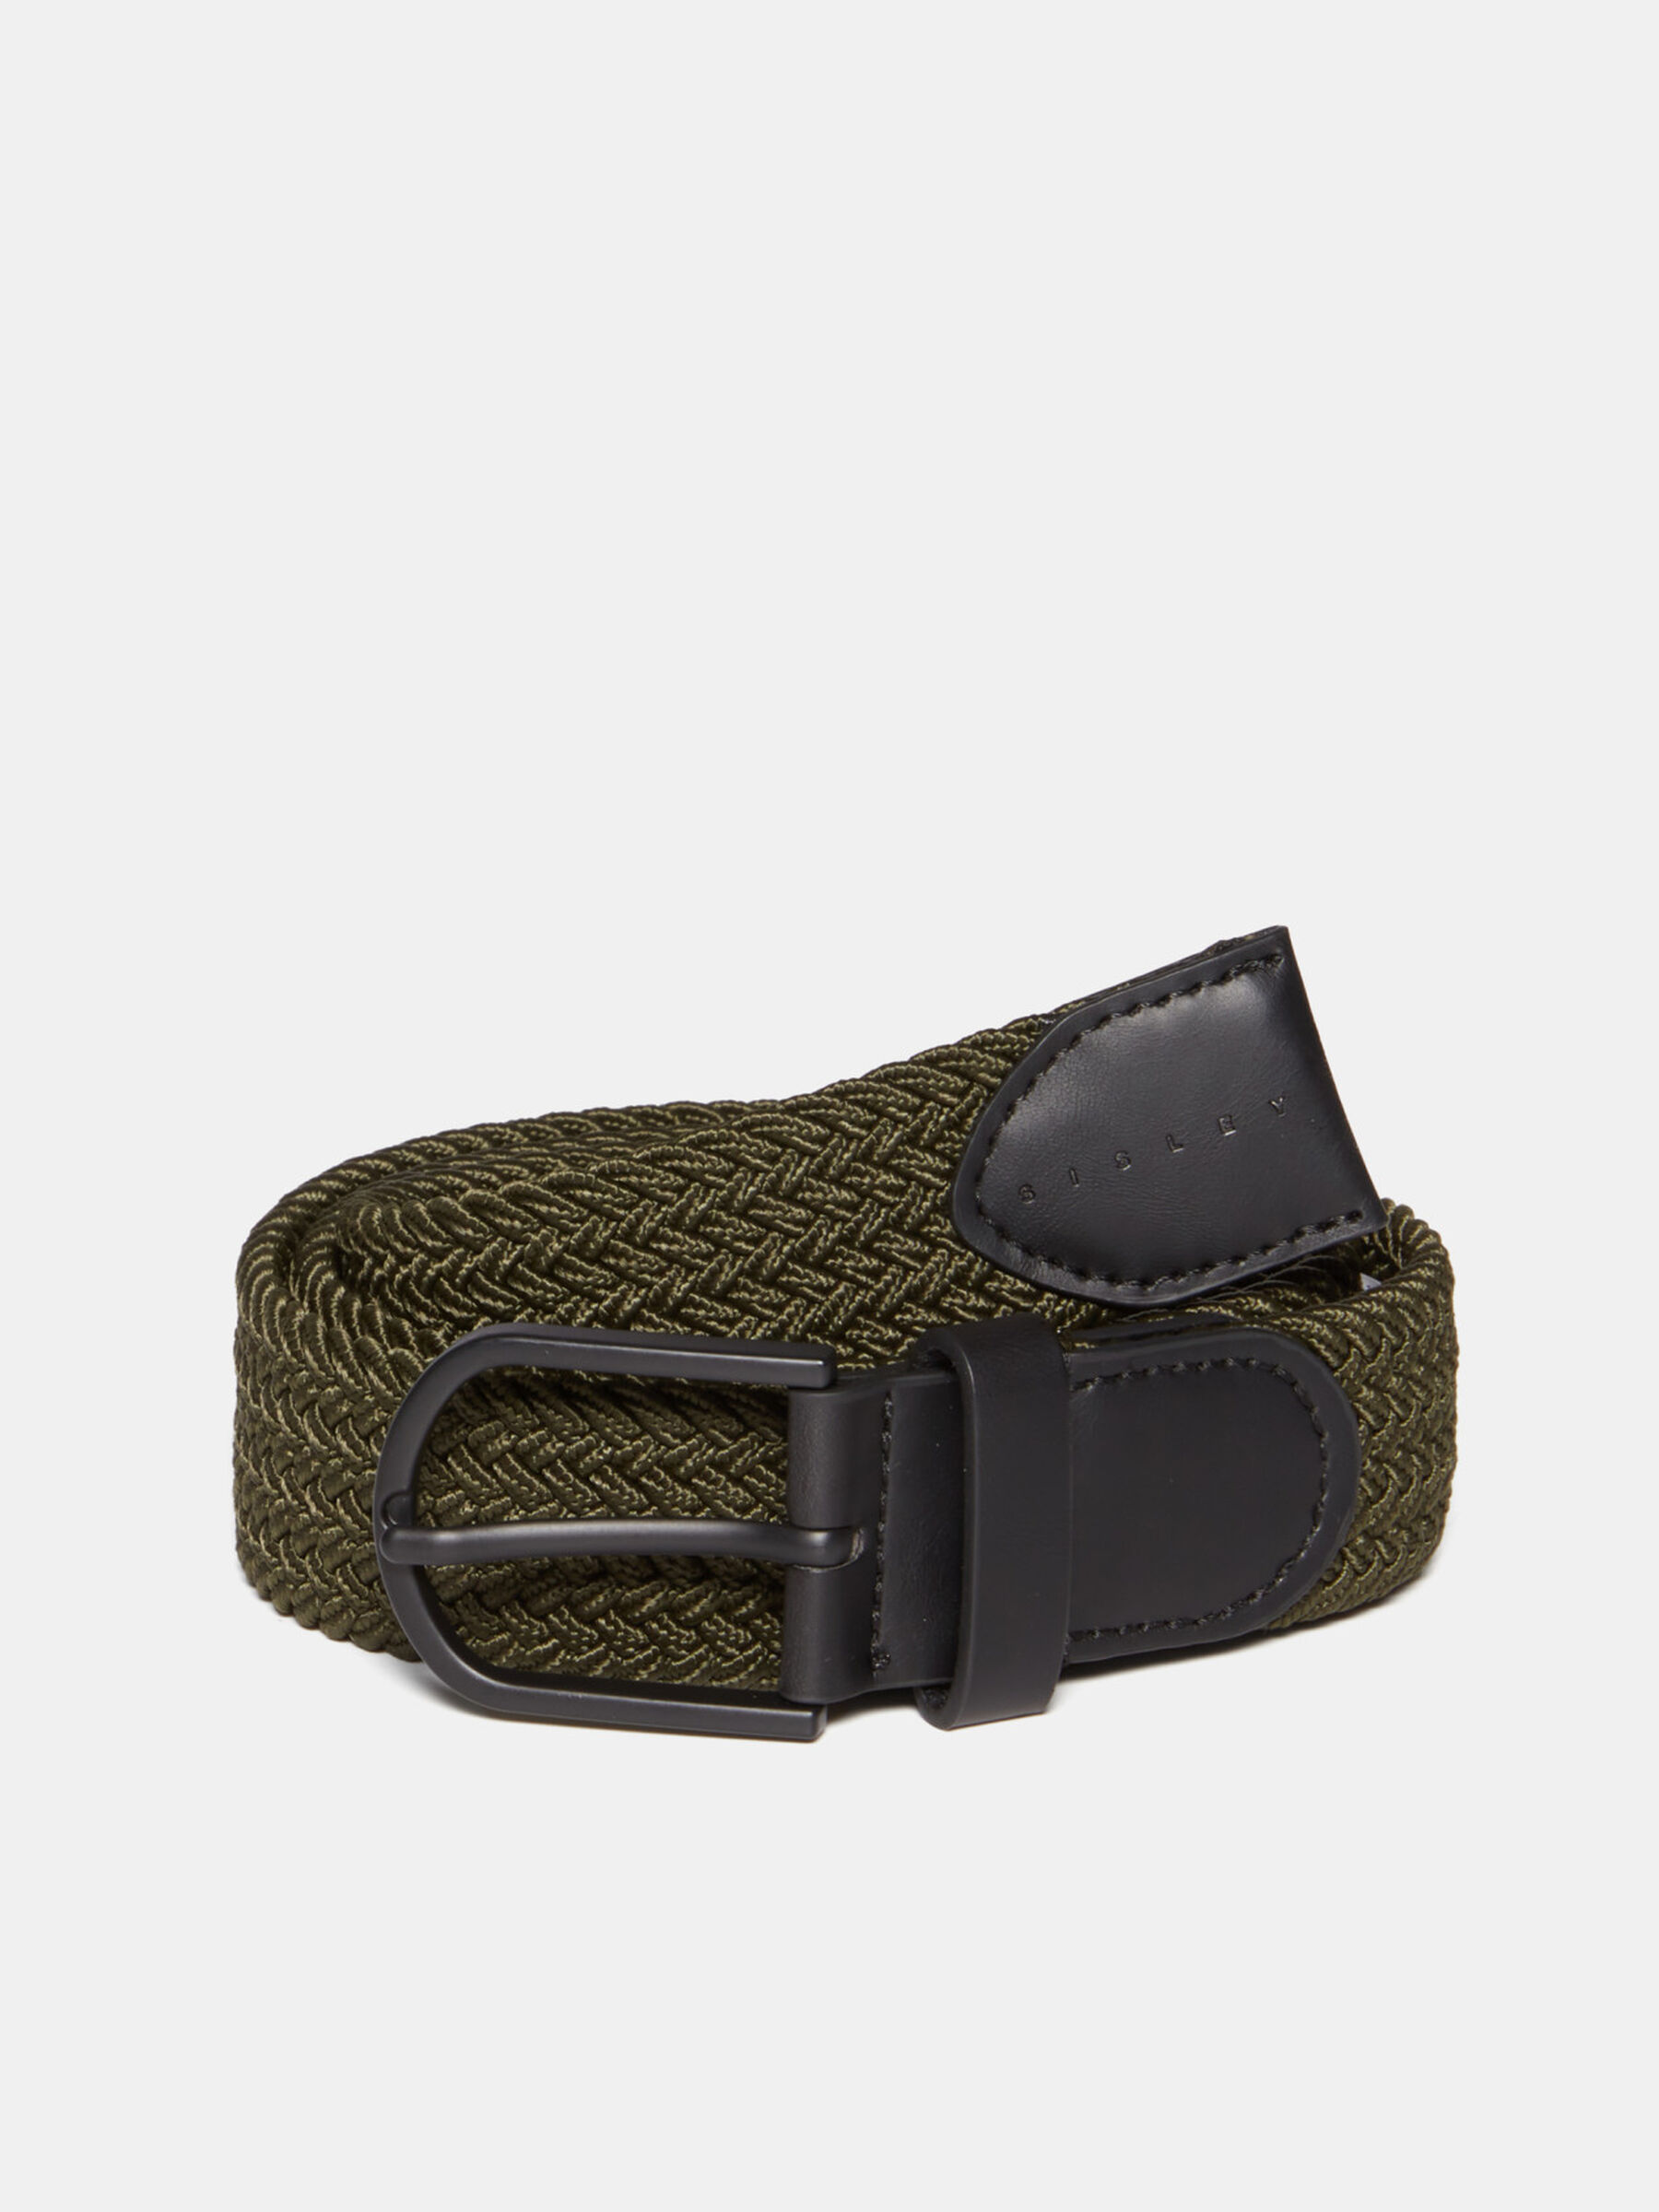 Fabric Belts - Buy Fabric Belts Online Starting at Just ₹136